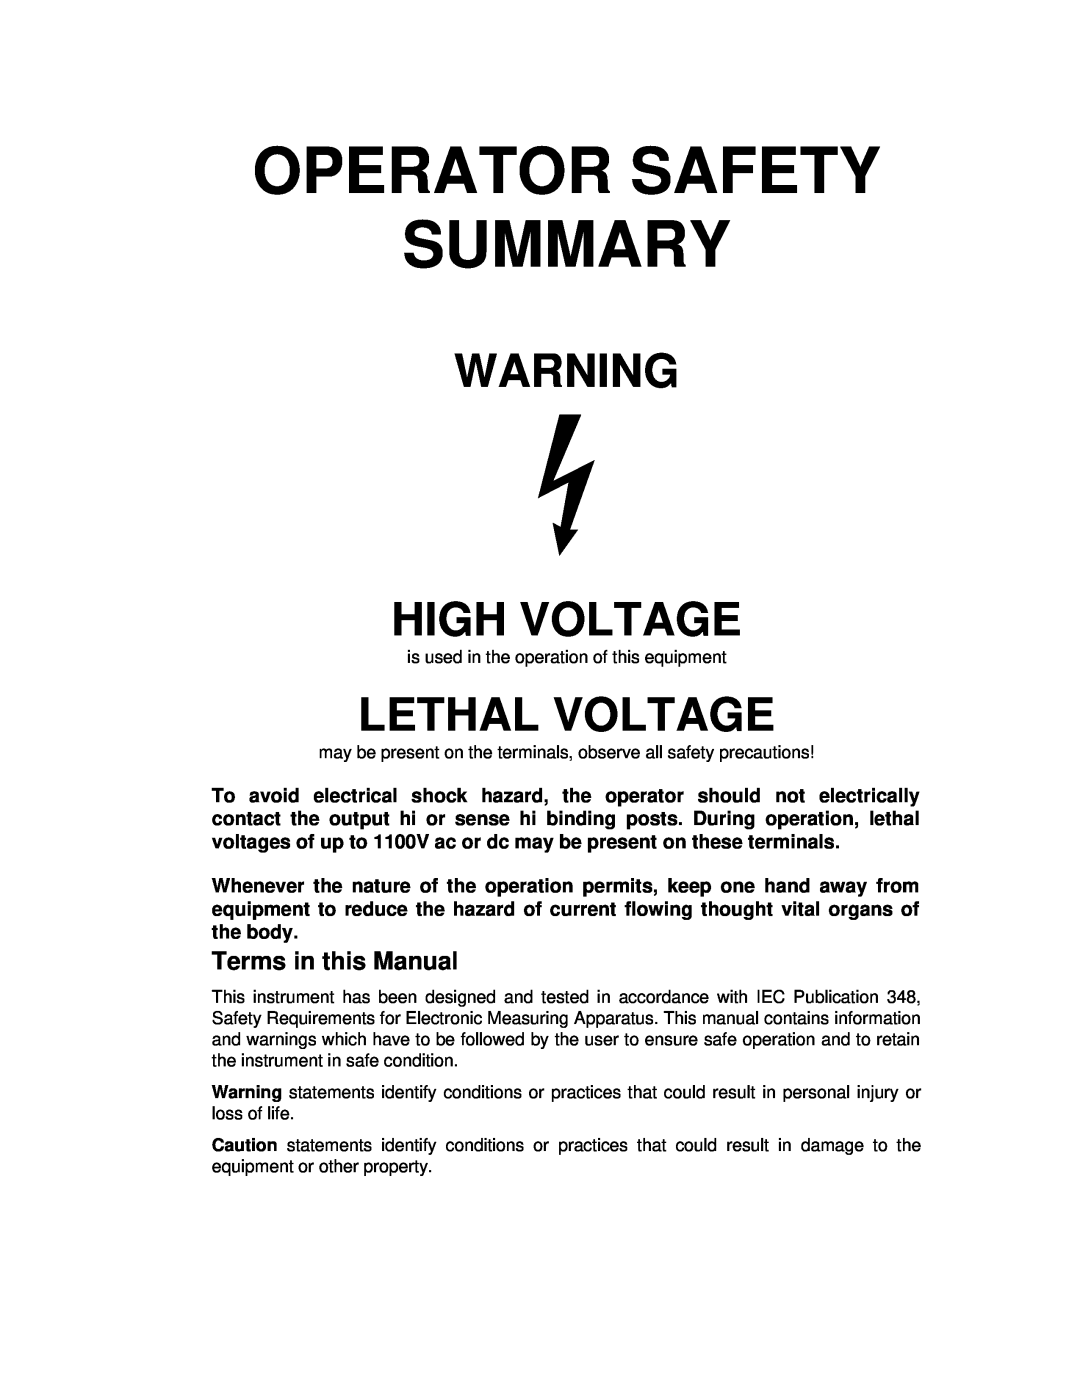 Fluke 5720A service manual Operator Safety Summary, High Voltage, Lethal Voltage, Terms in this Manual 